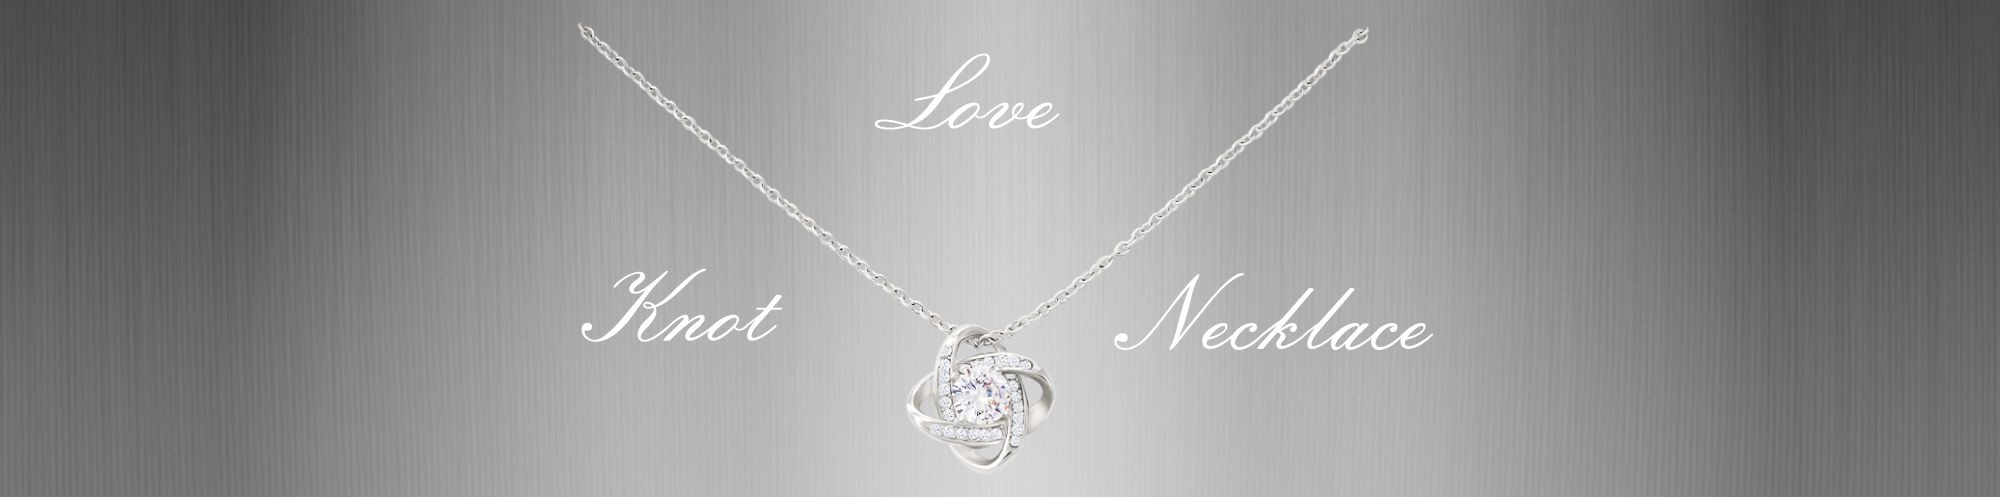 Love Knot necklace luxury box